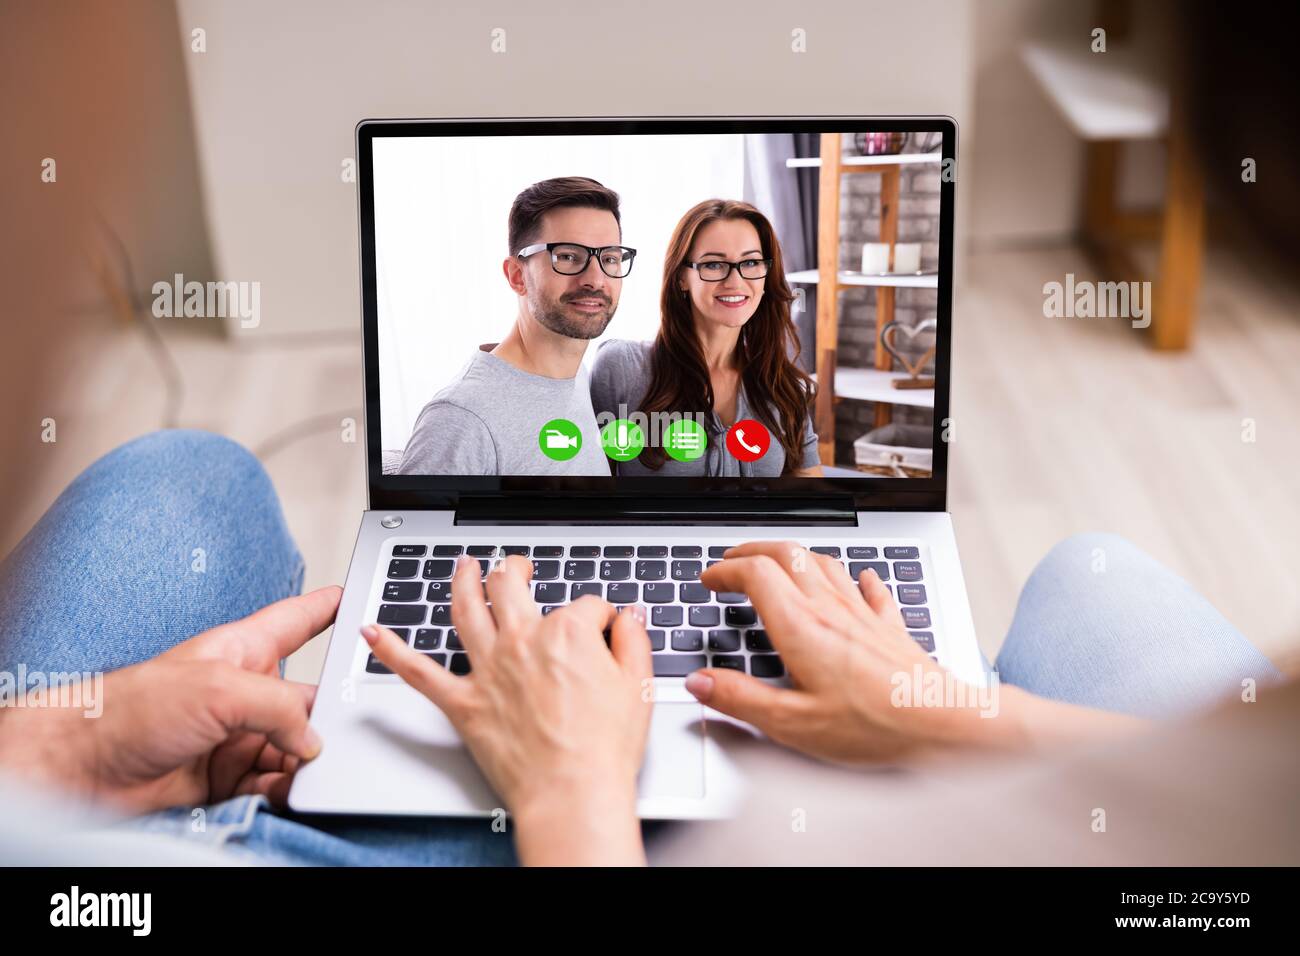 Couple In Video Conference Chat With Friends Stock Photo